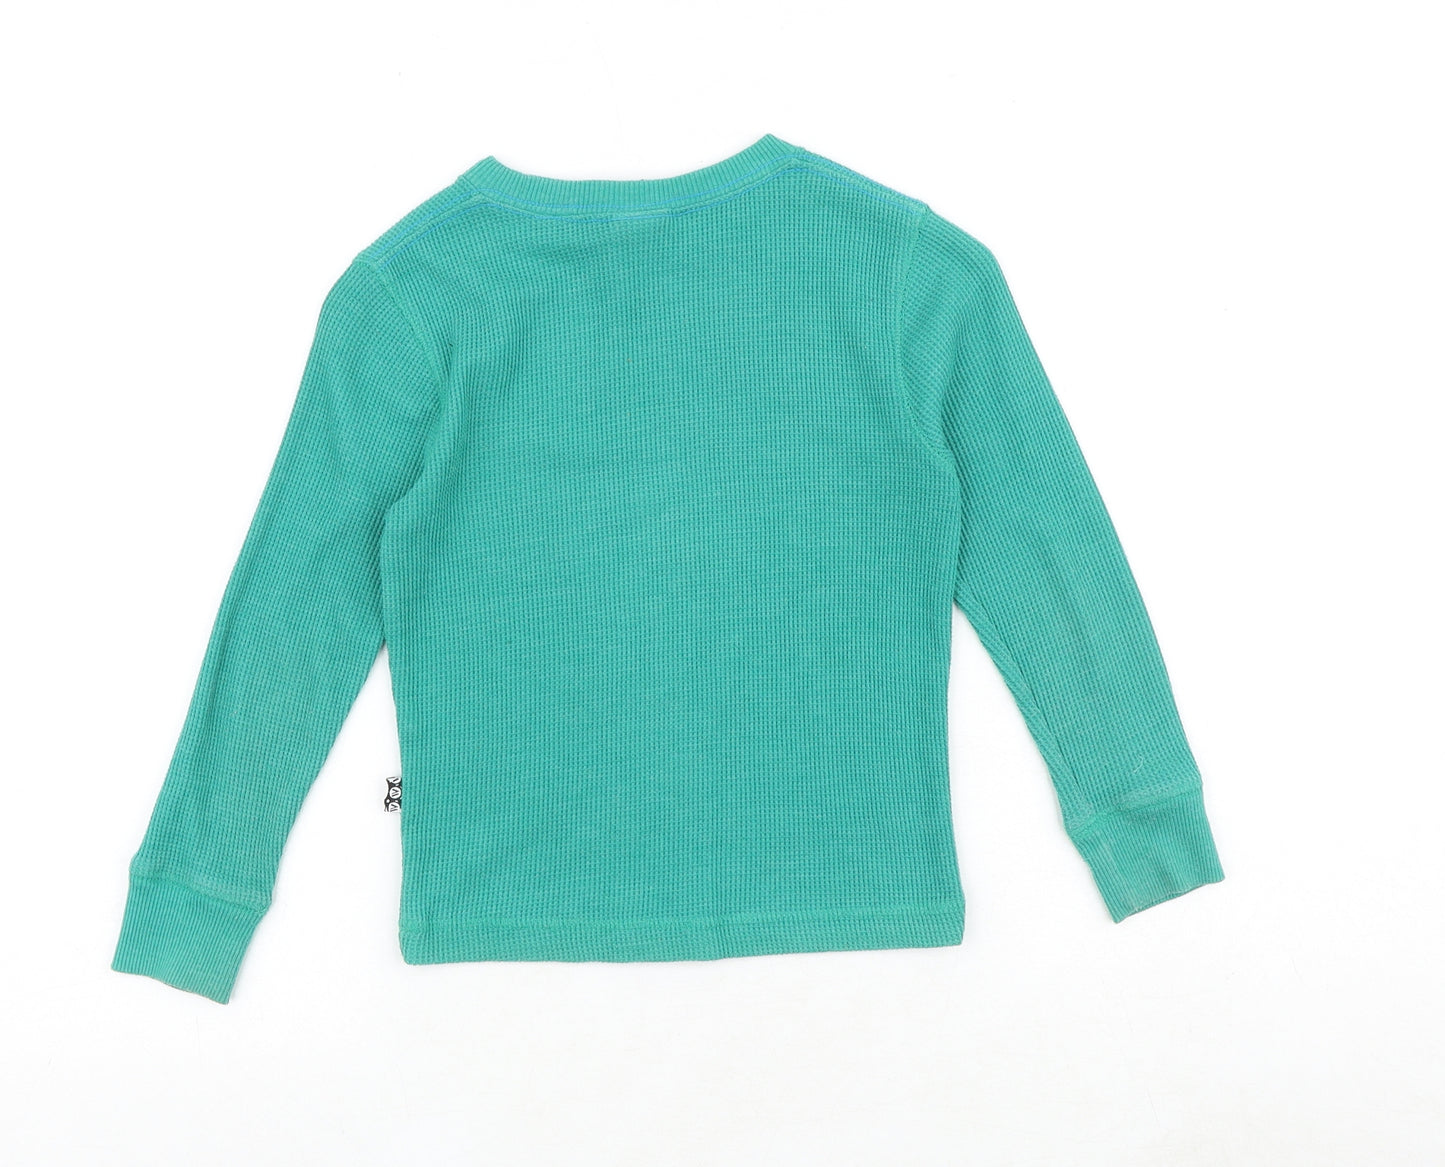 Shaw White Boys Green Cotton Pullover T-Shirt Size XS Round Neck Pullover - Textured Skateboard